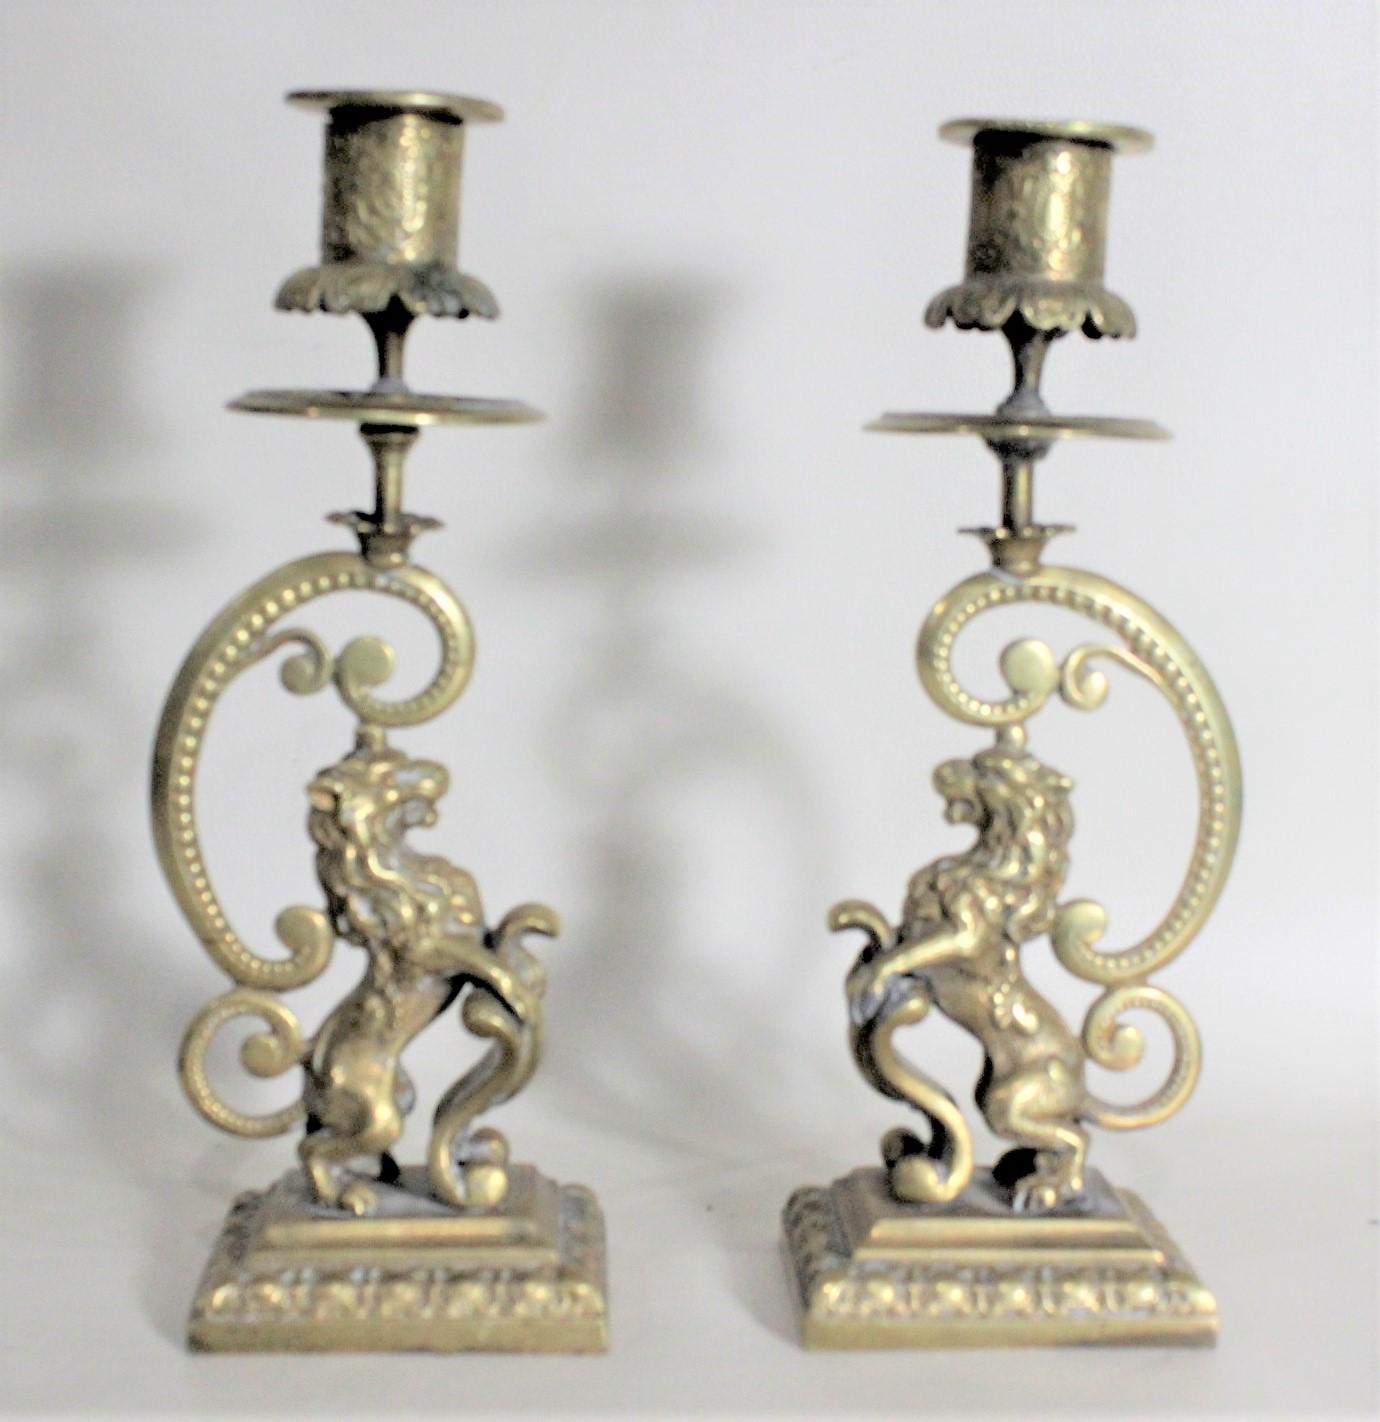 Pair of Victorian English Cast Brass Candlesticks with Rearing Figural Lions For Sale 6